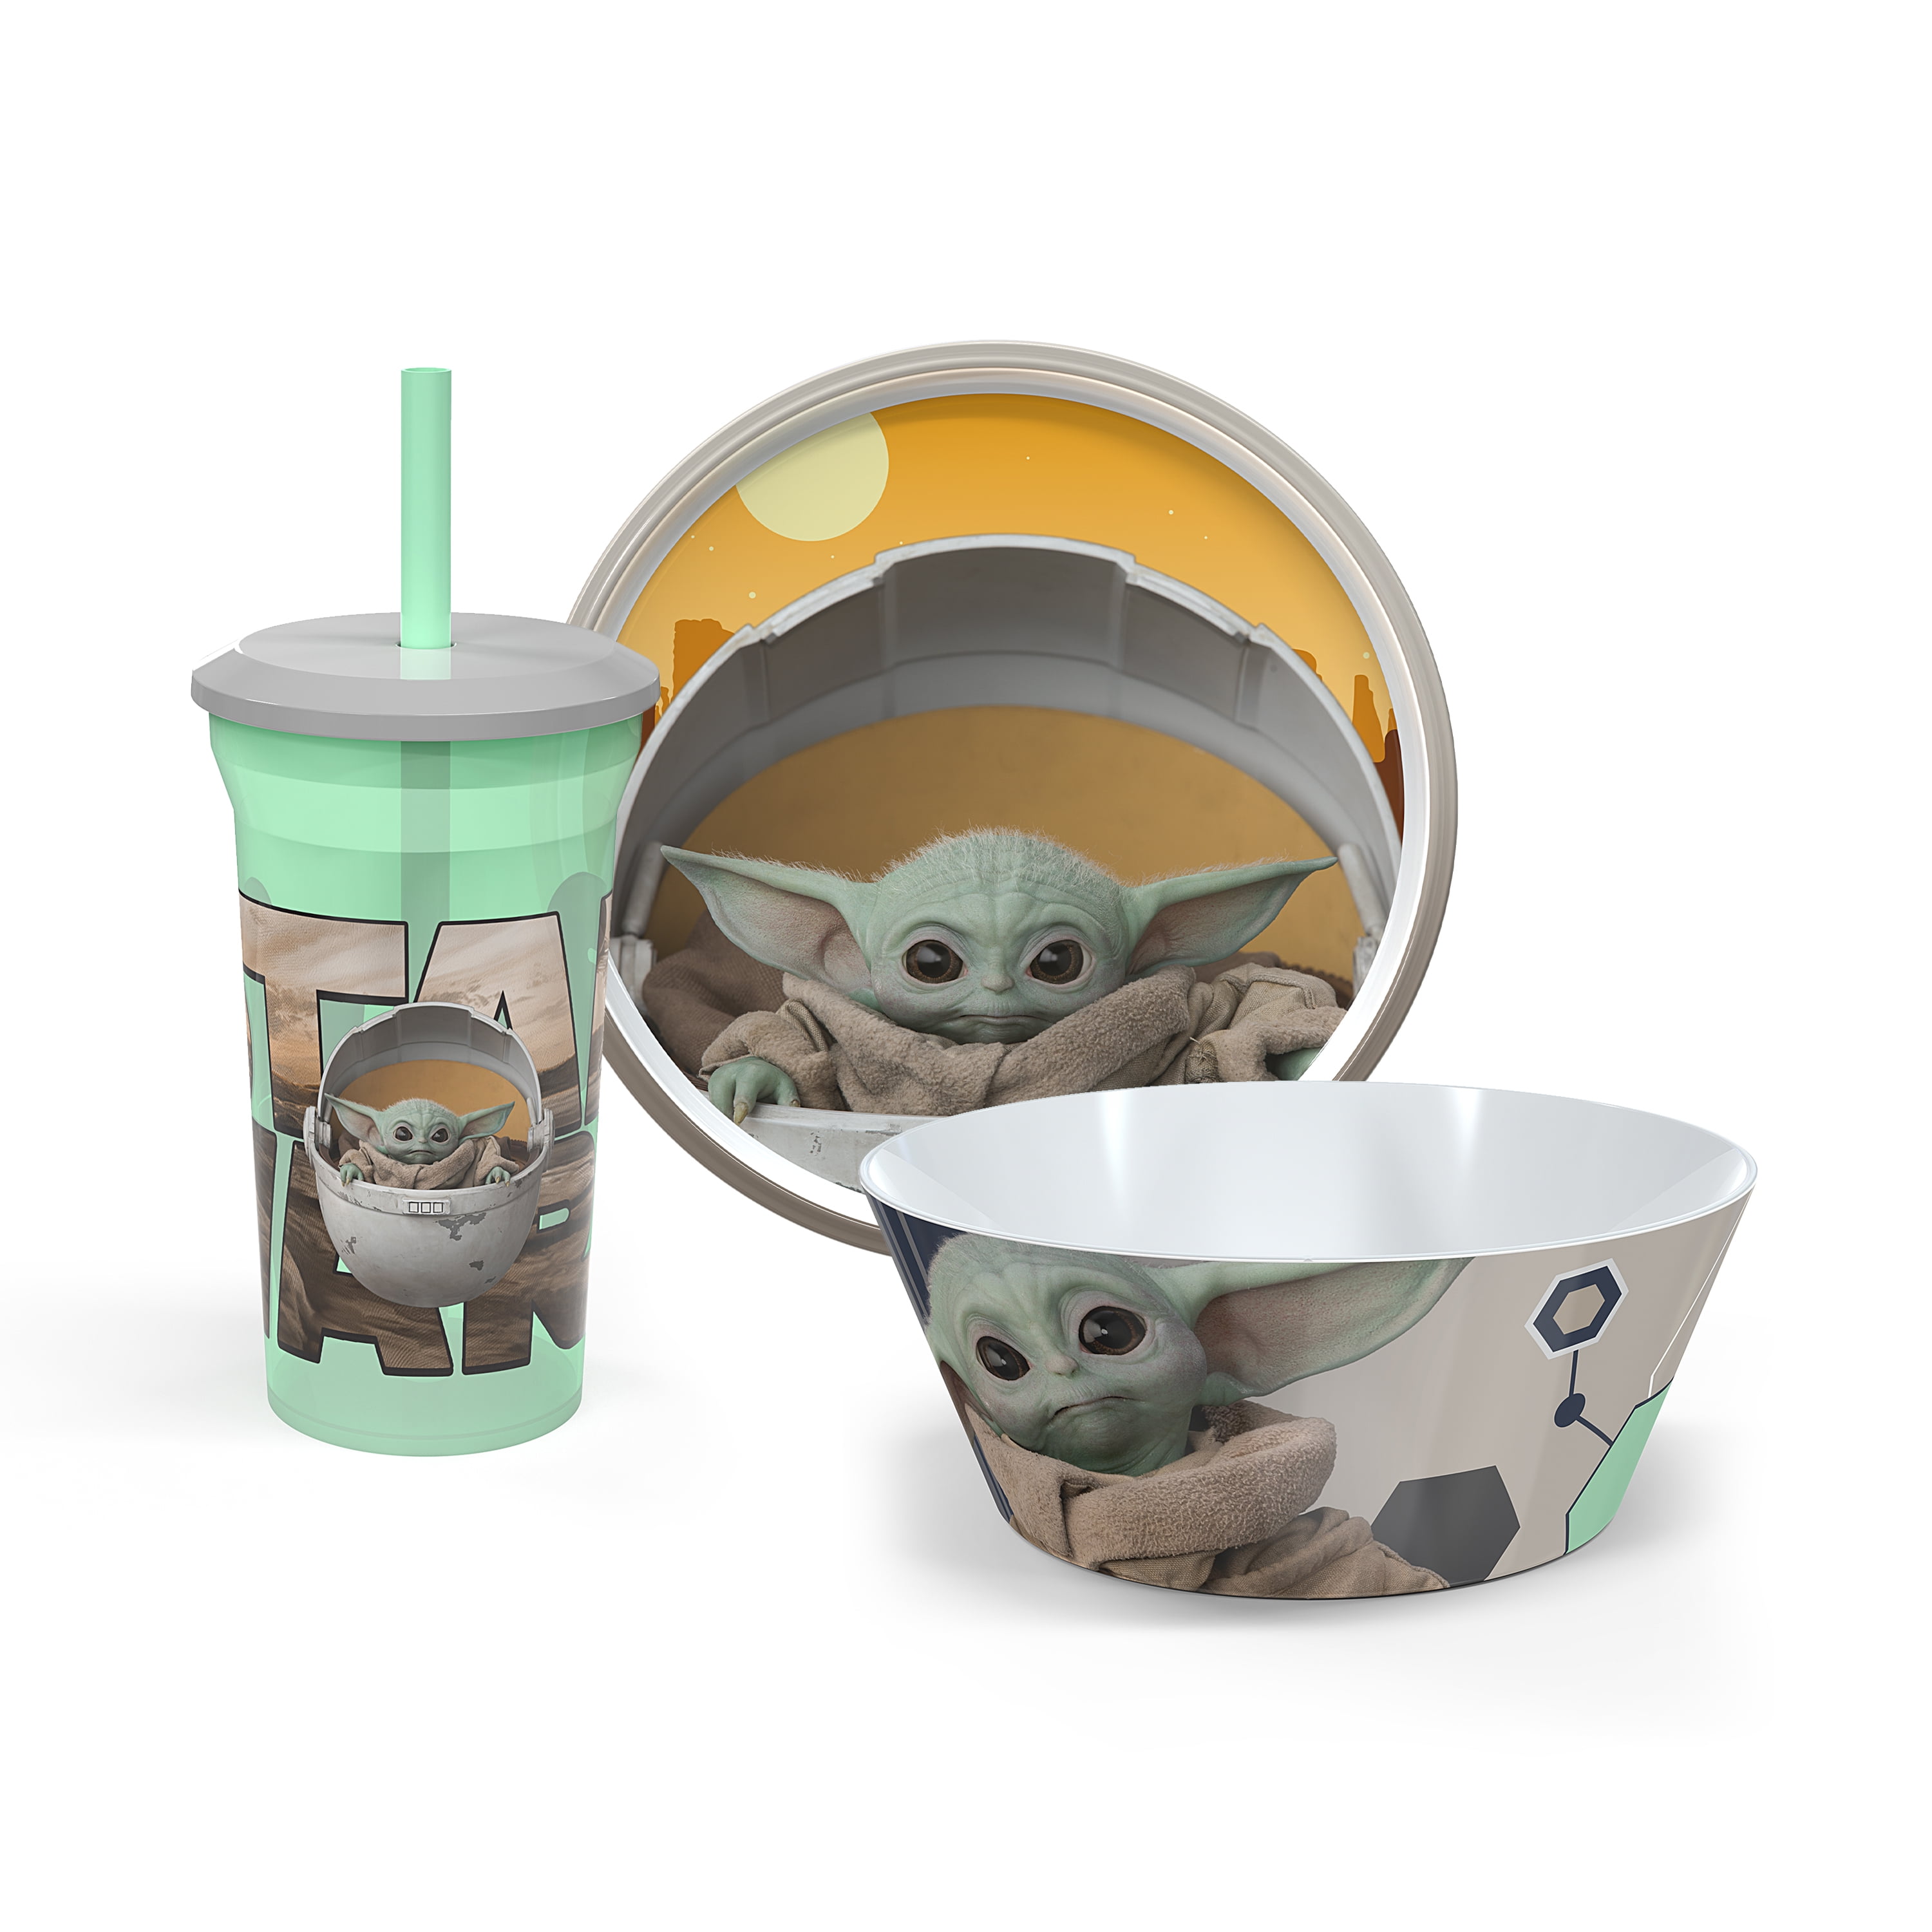 Disney Parks Star Wars Yoda Plastic Stacking Meal Set Bowl Plate Cup